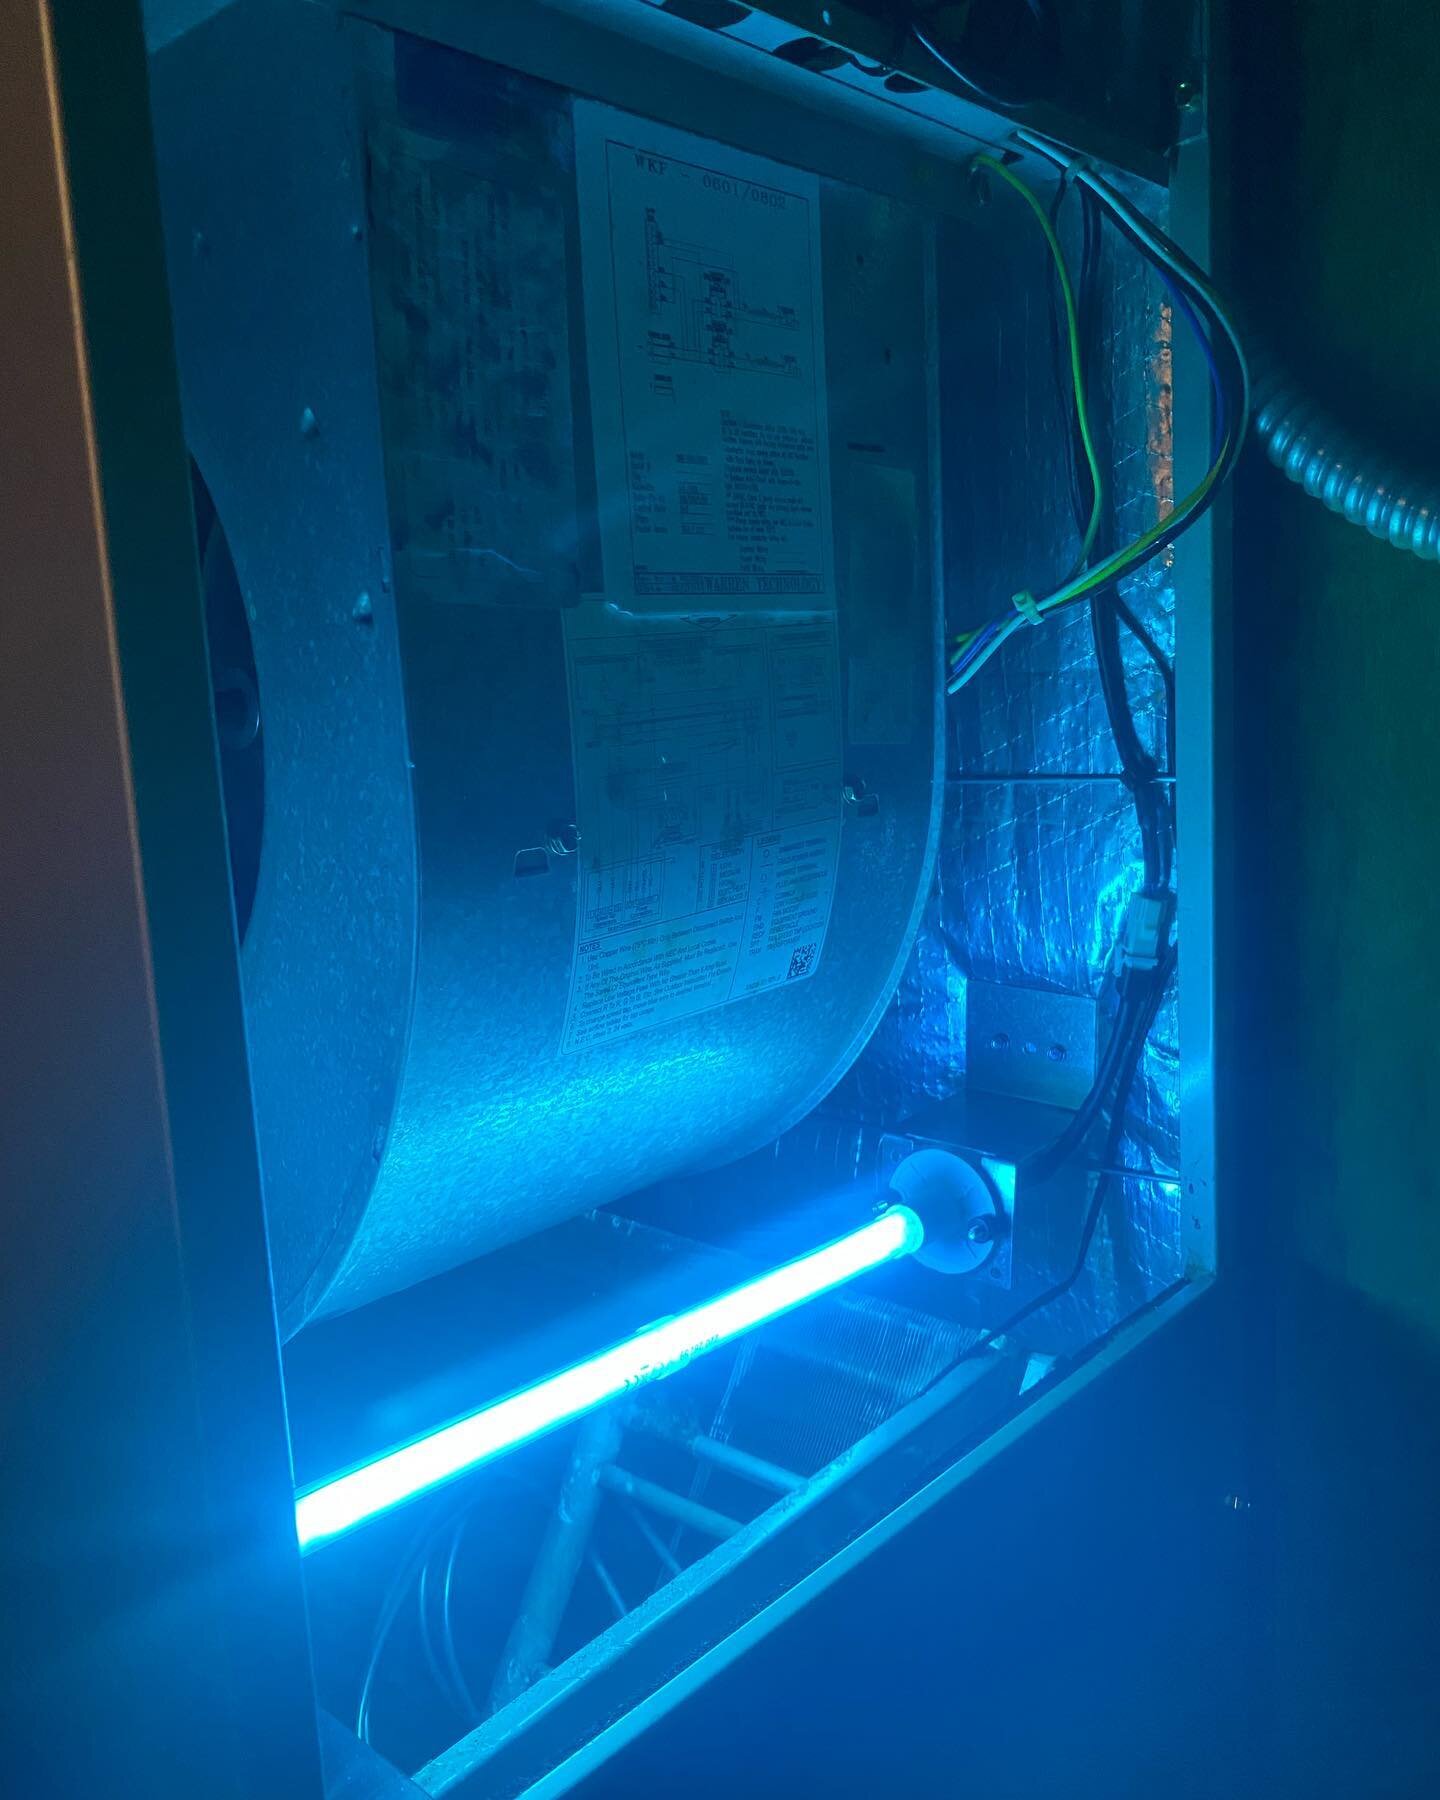 Is your HVAC system equipped with UV light? UV lights kill germ DNA, viruses, mold spores, and other bacteria. Installing a UV light significantly reduces the ability for mold to grow in the machine, allowing your system to run better for longer. Wha